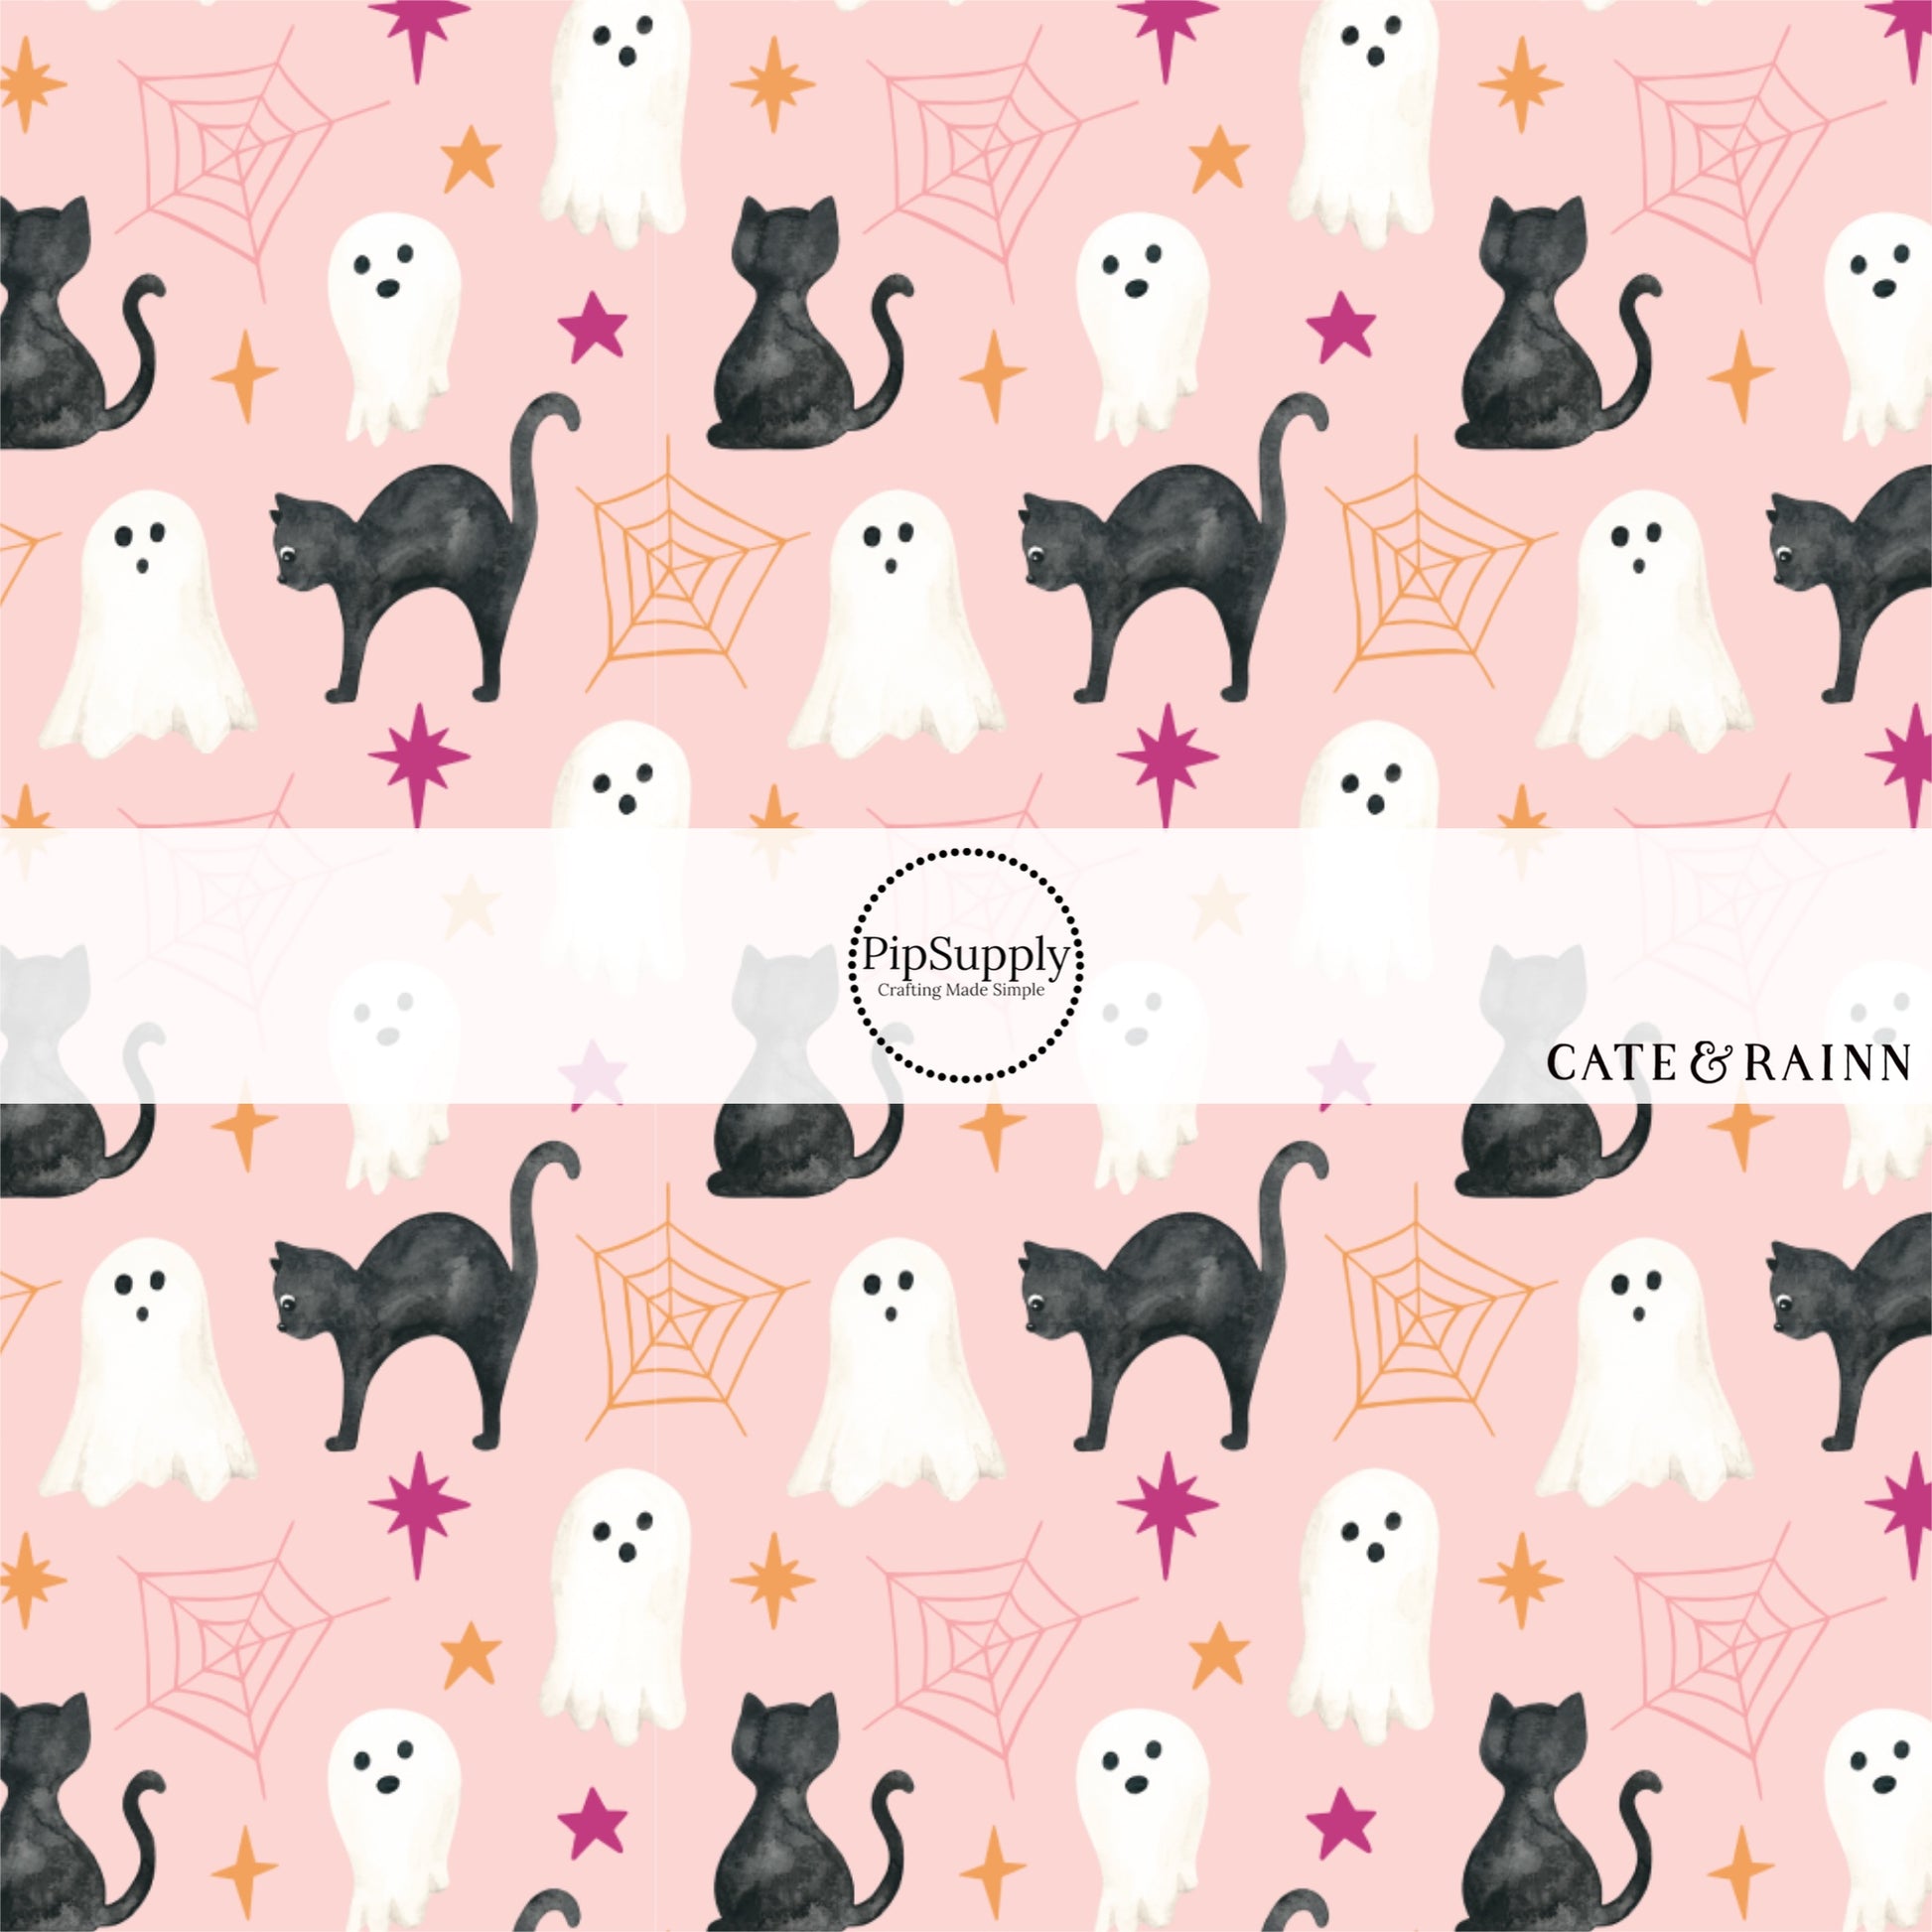 These Halloween themed pastel pink no sew bow strips can be easily tied and attached to a clip for a finished hair bow. These fun spooky bow strips are great for personal use or to sell. The bow stripes features black cats, ghost, spiderwebs, and dark pink and orange stars on pale pink.